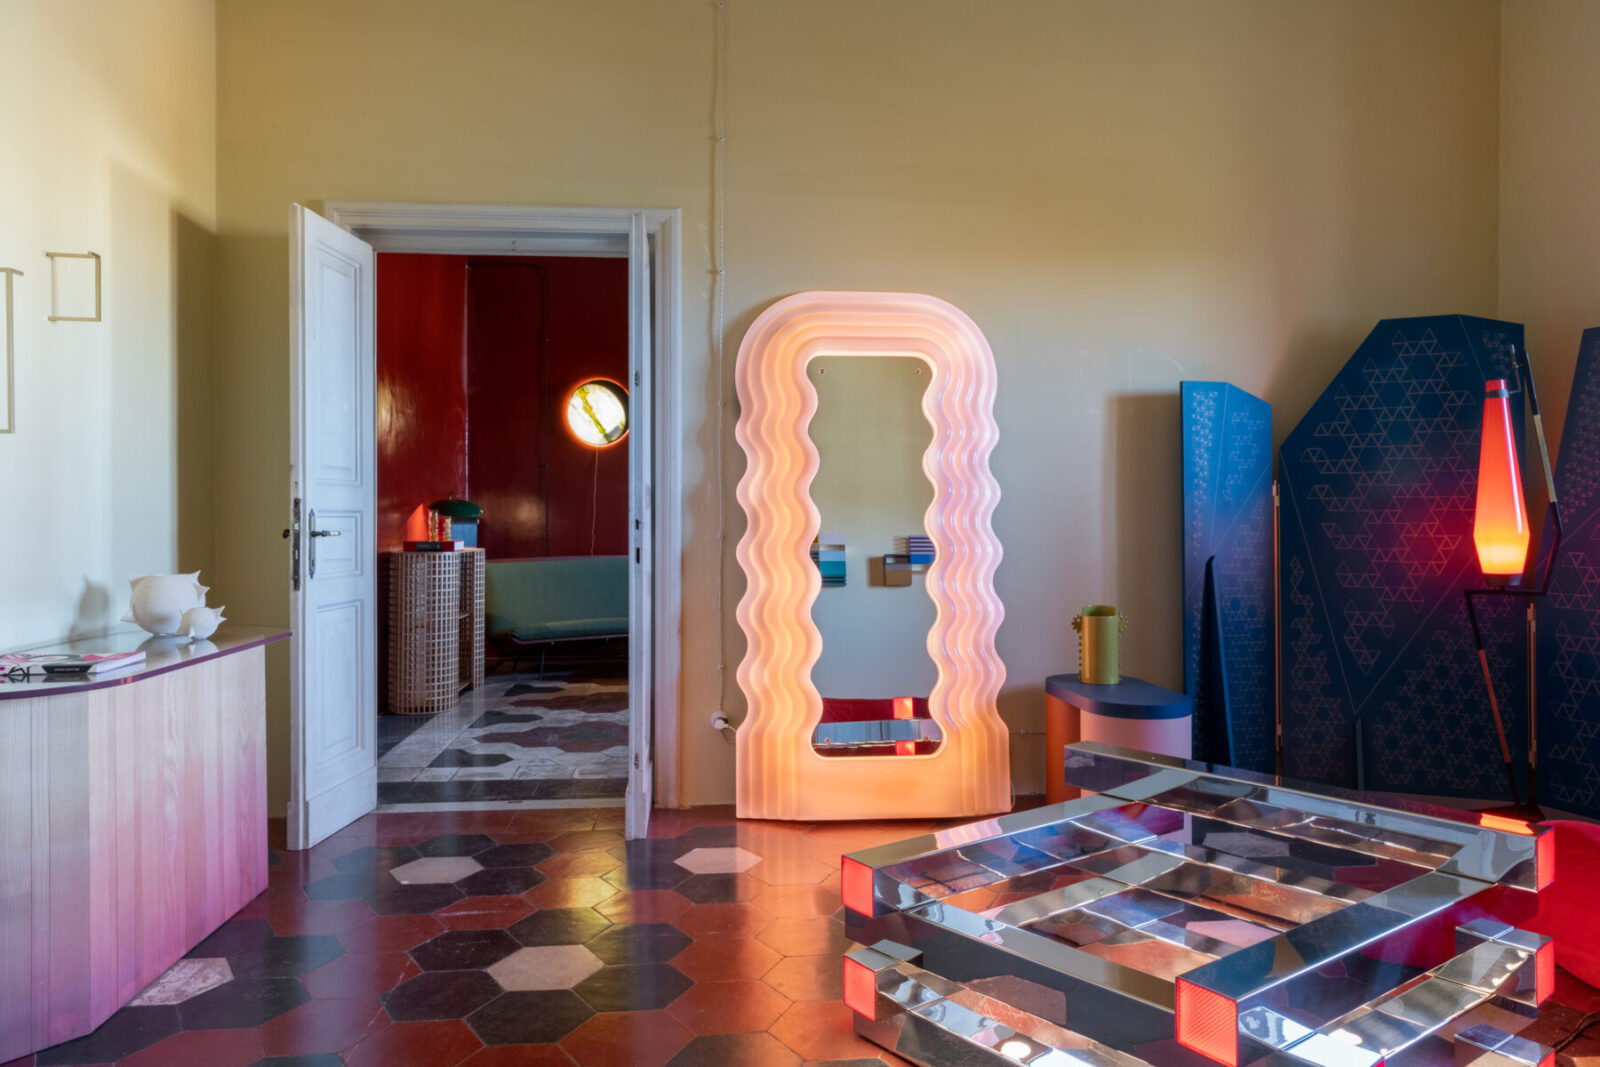 Archisearch Apartamento: Modern living at Contemporary Cluster combines research with historical and contemporary design | by Giorgia Cerulli & Giacomo Guidi